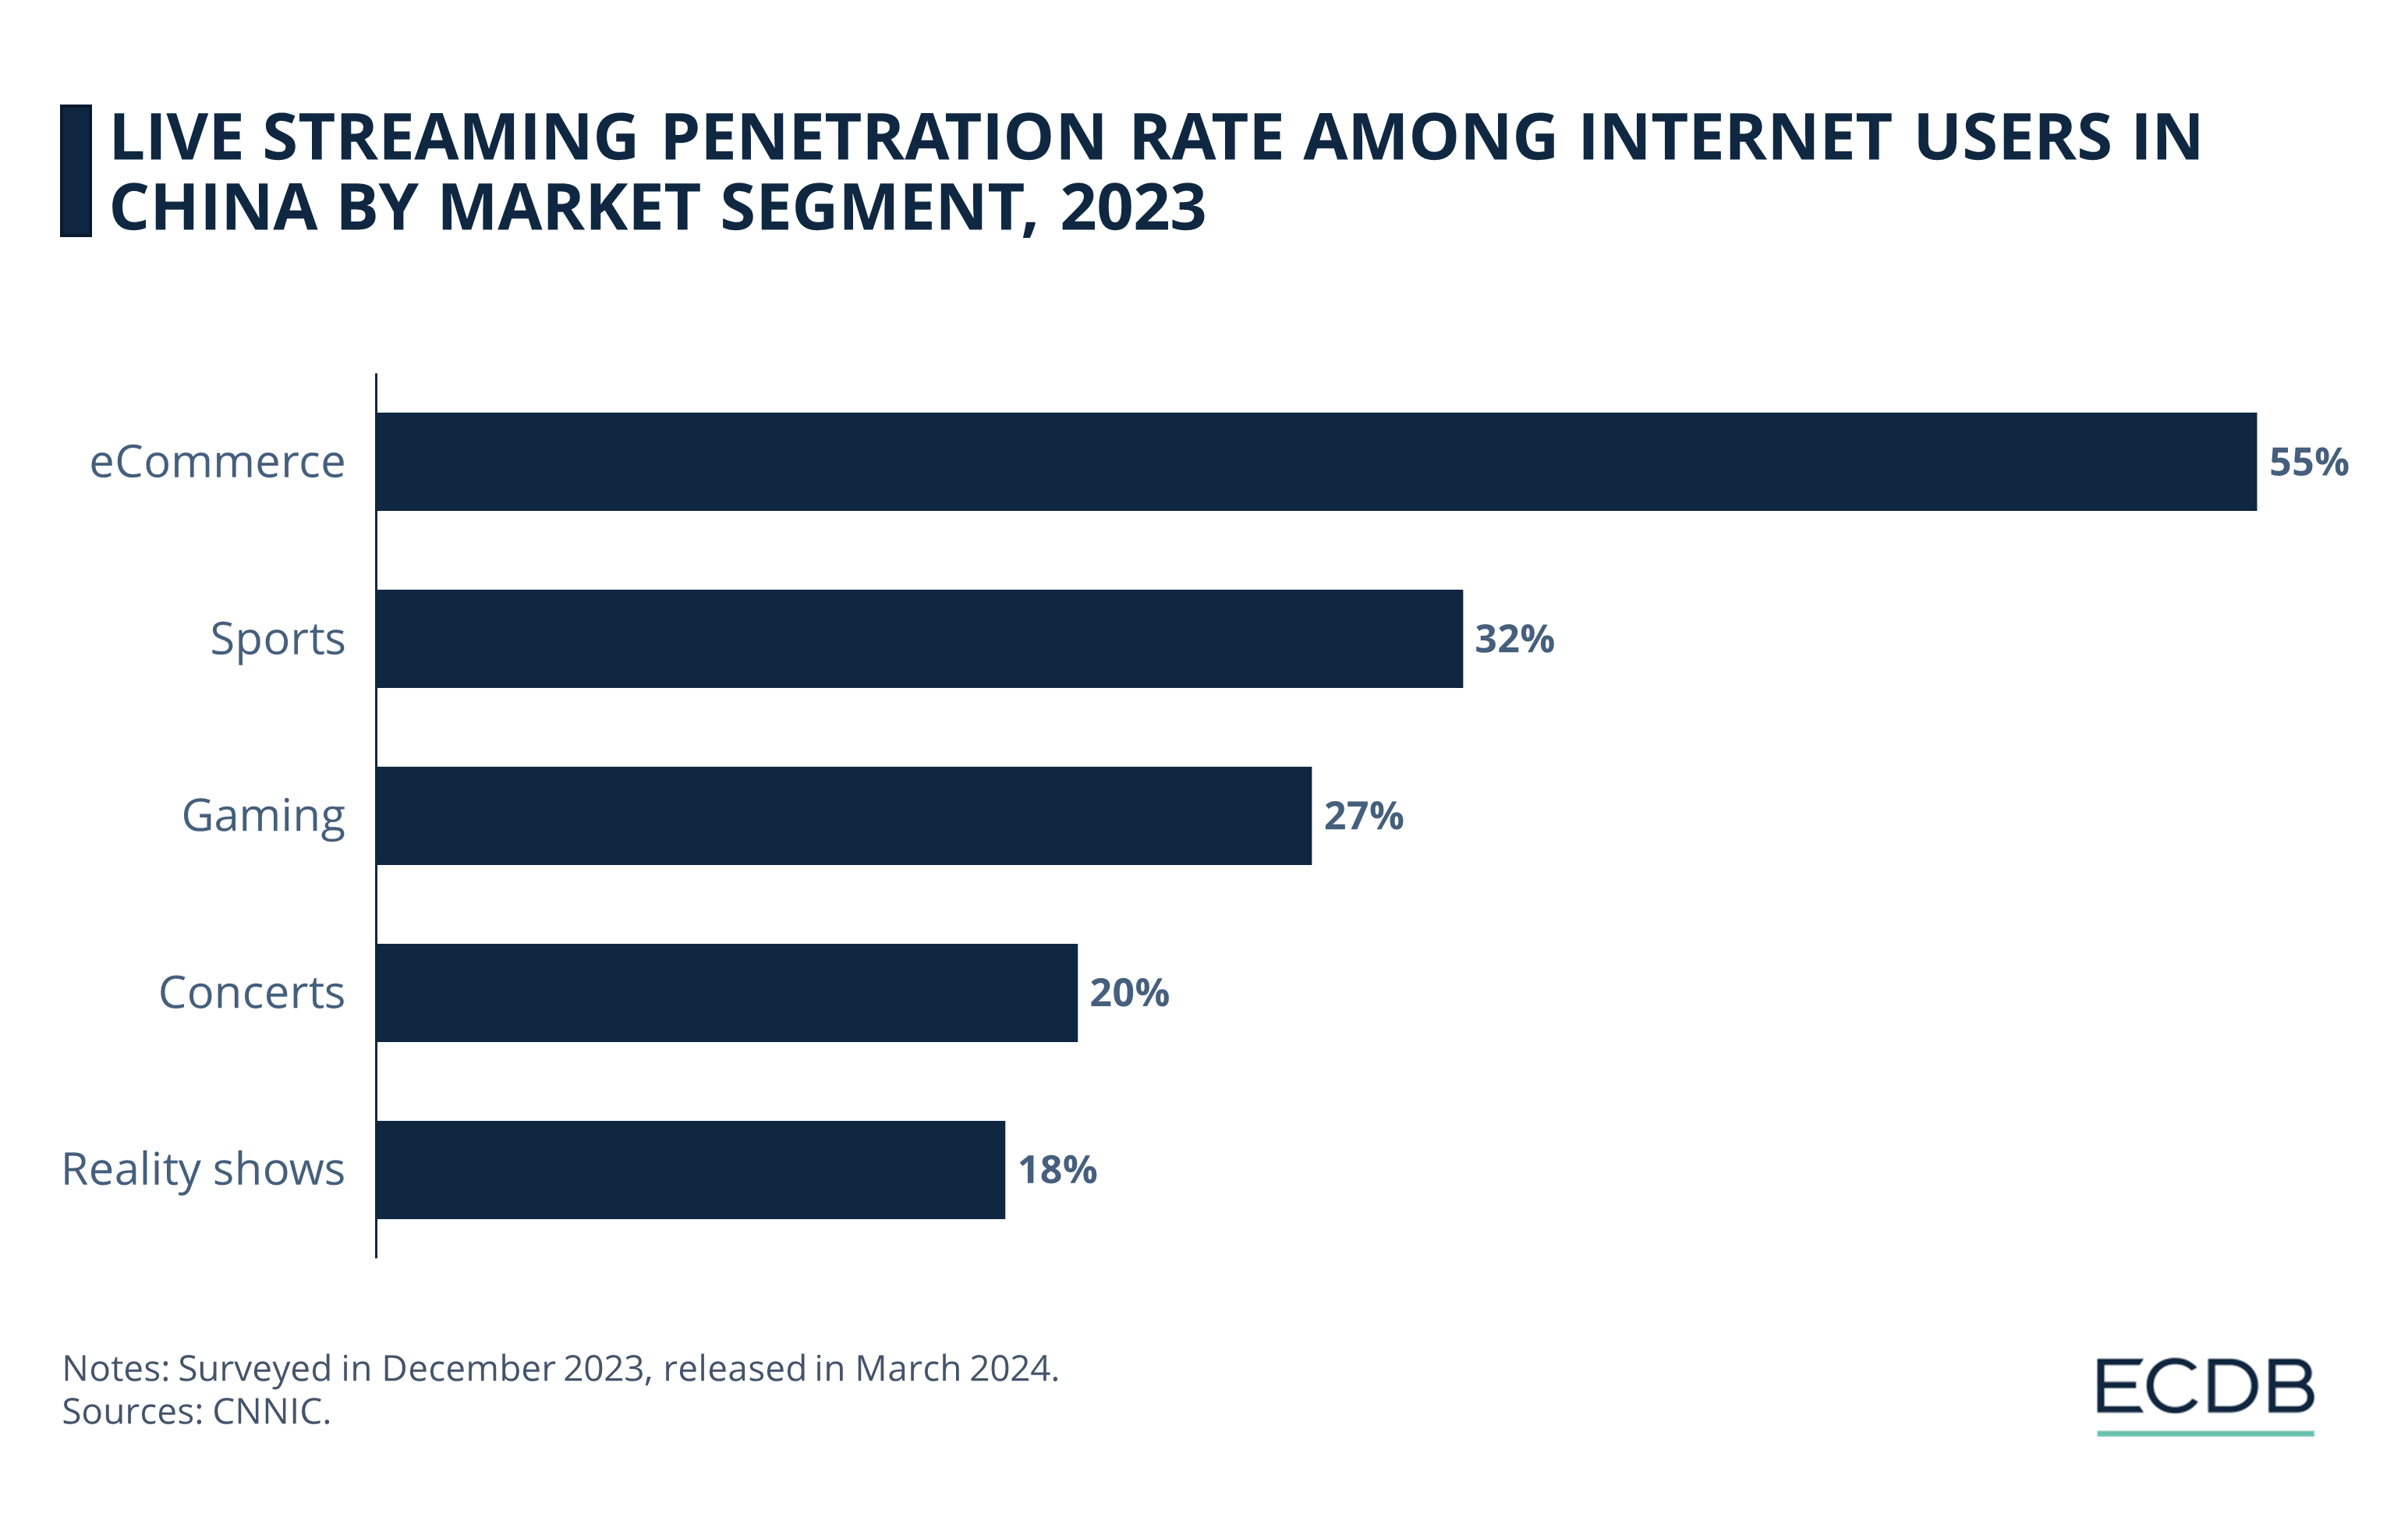 Live Streaming Penetration Rate Among Internet Users in China by Market Segment, 2023